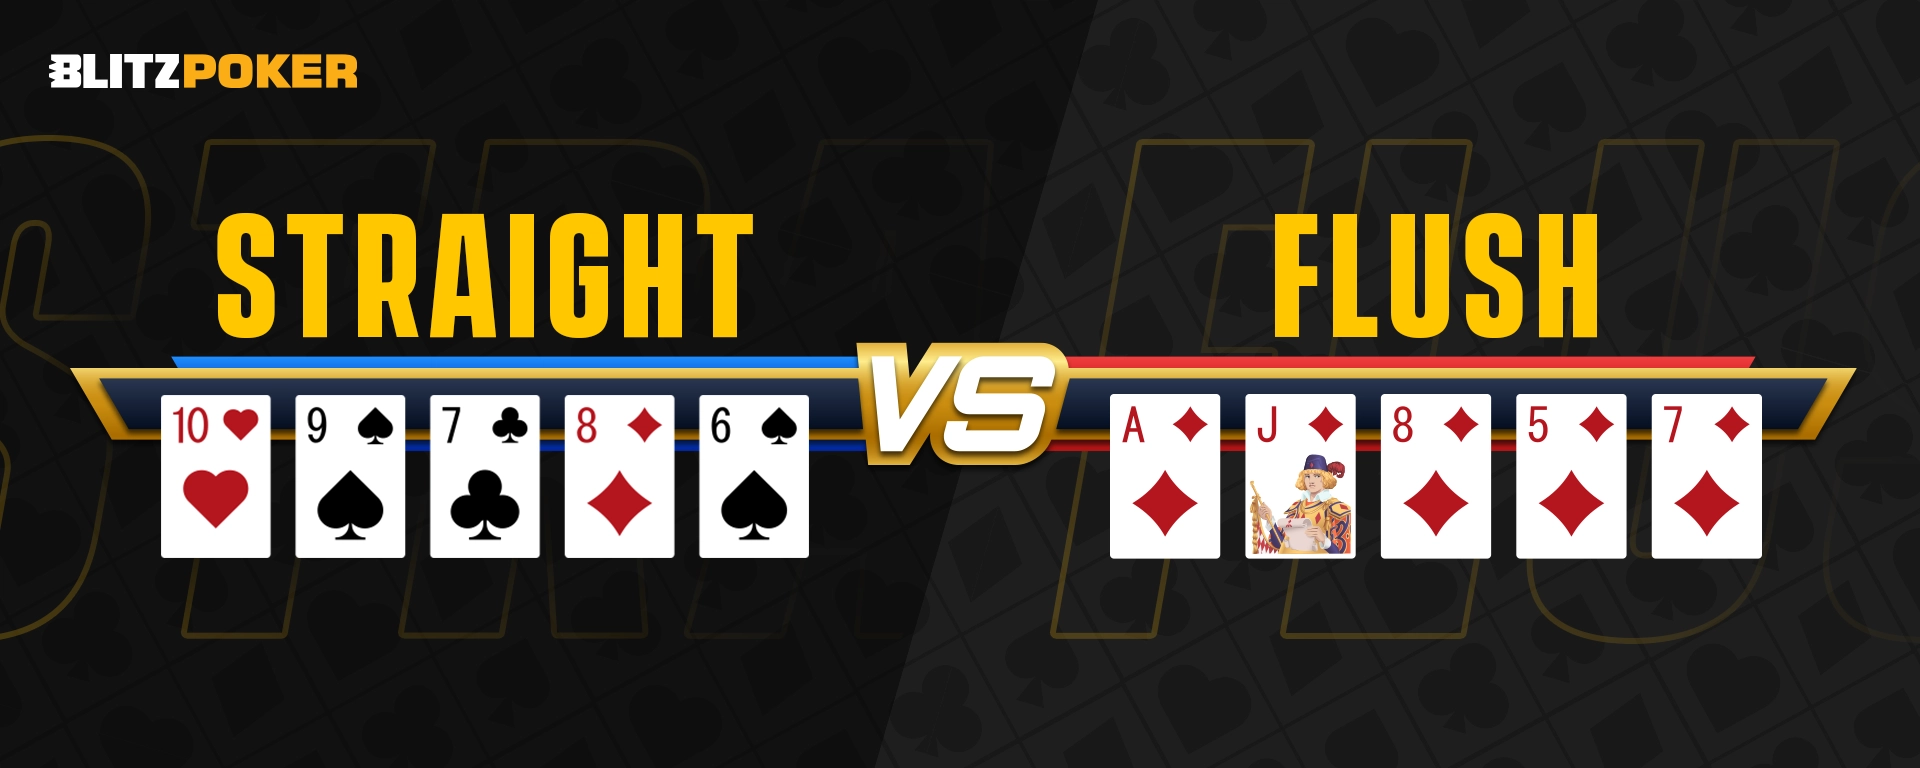 Straight vs Flush: Know Which Hand Packs the Ultimate Poker Punch